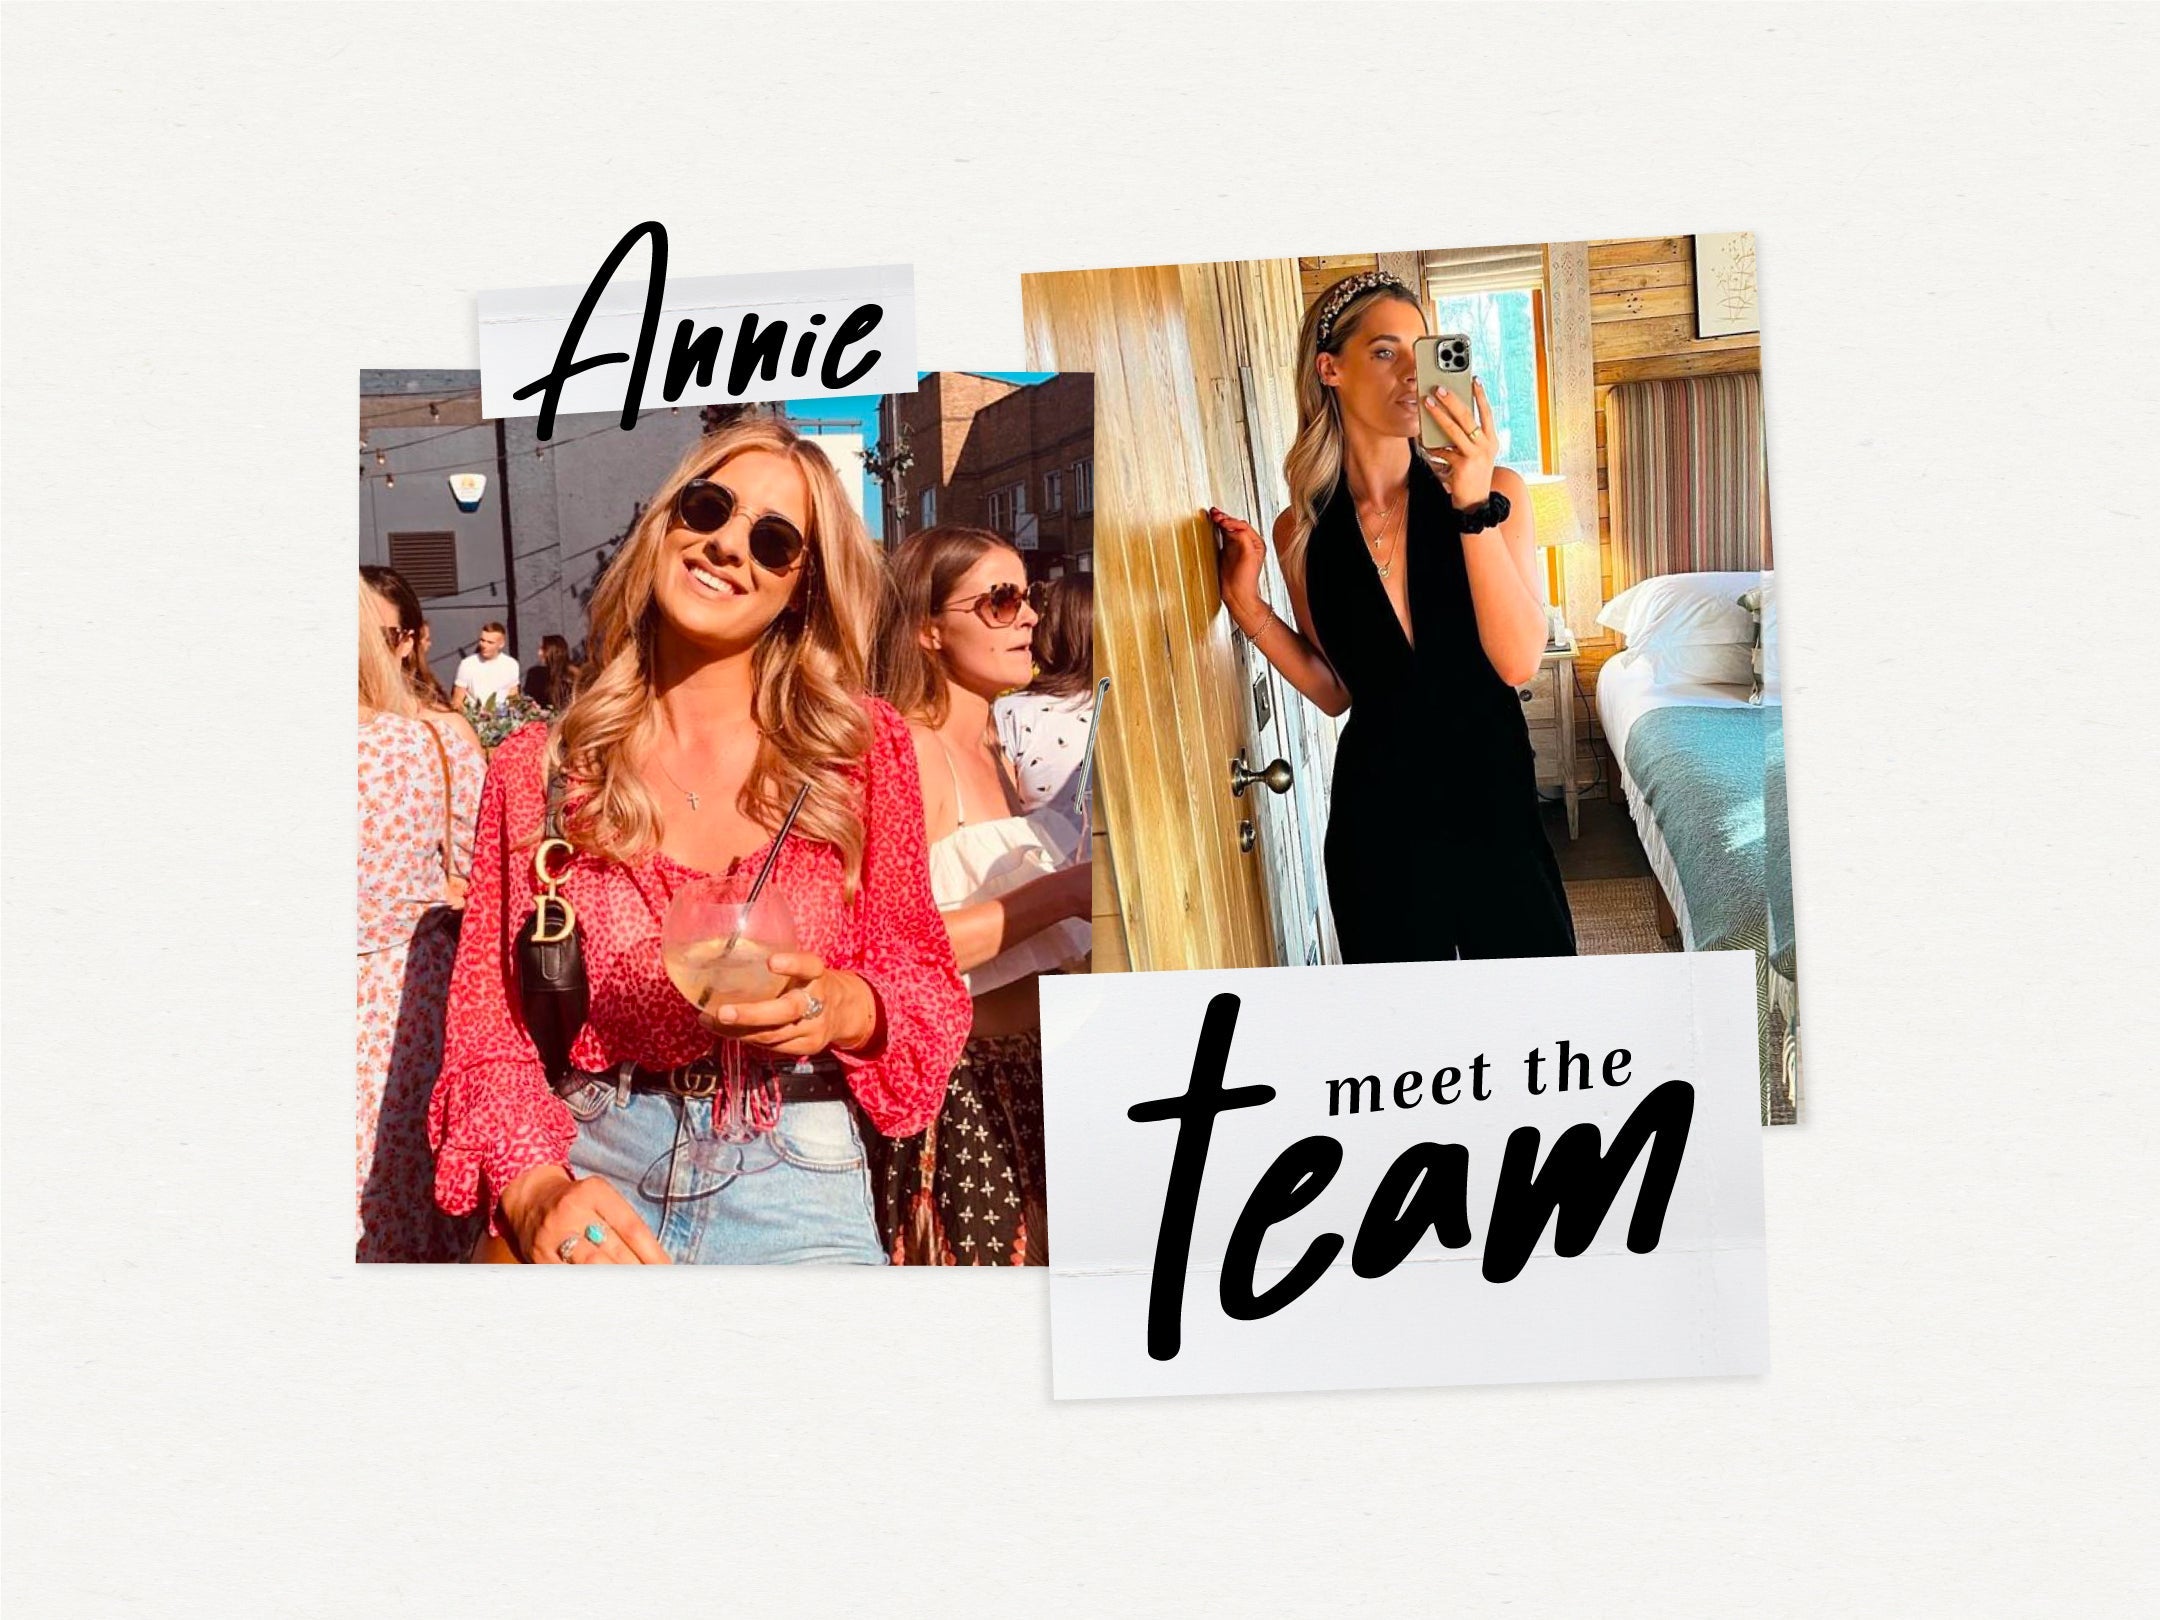 Meet the Team! Annie - Assistant Wholesale Manager